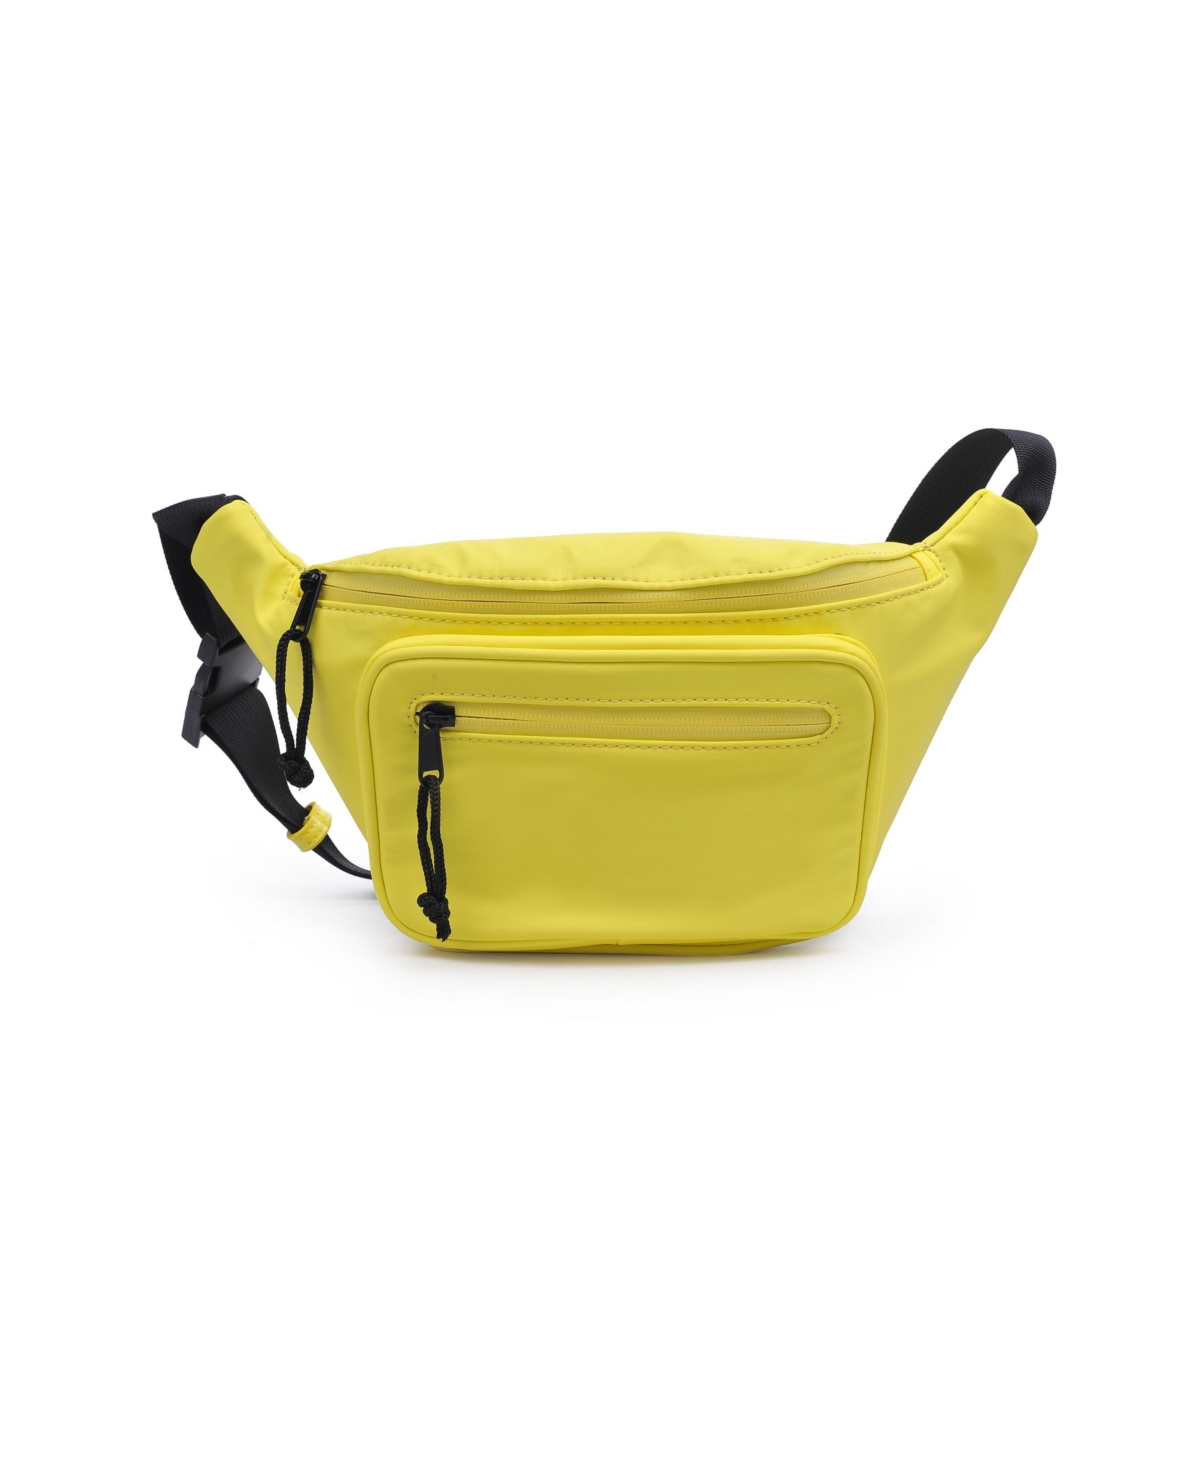 Hands Down Small Belt Bag - Bright Yellow